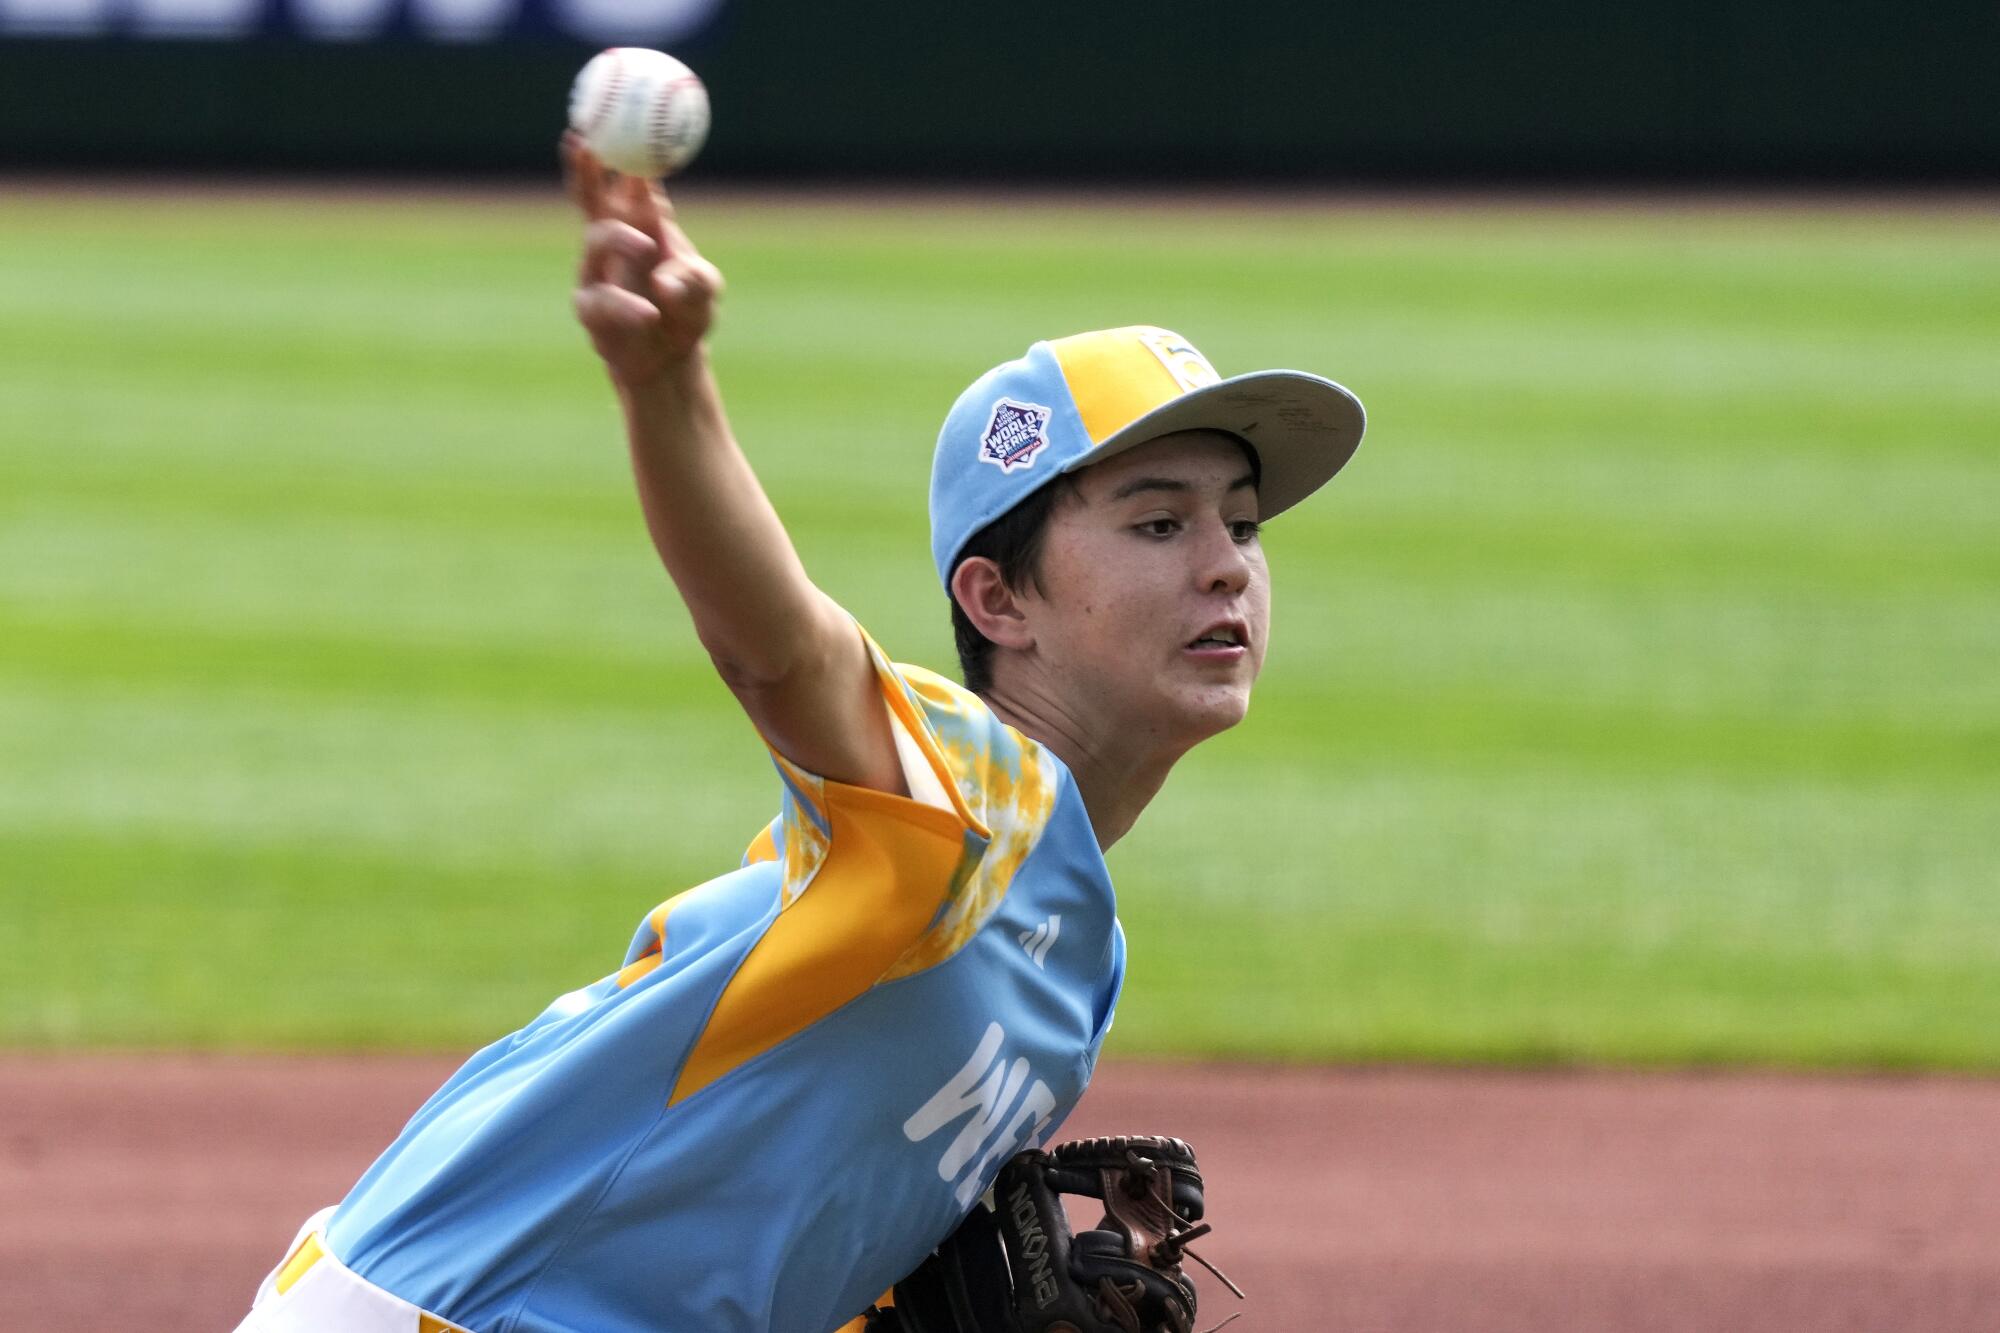 Louis Lappe delivers during a Little League World Series game for El Segundo on Aug. 26.